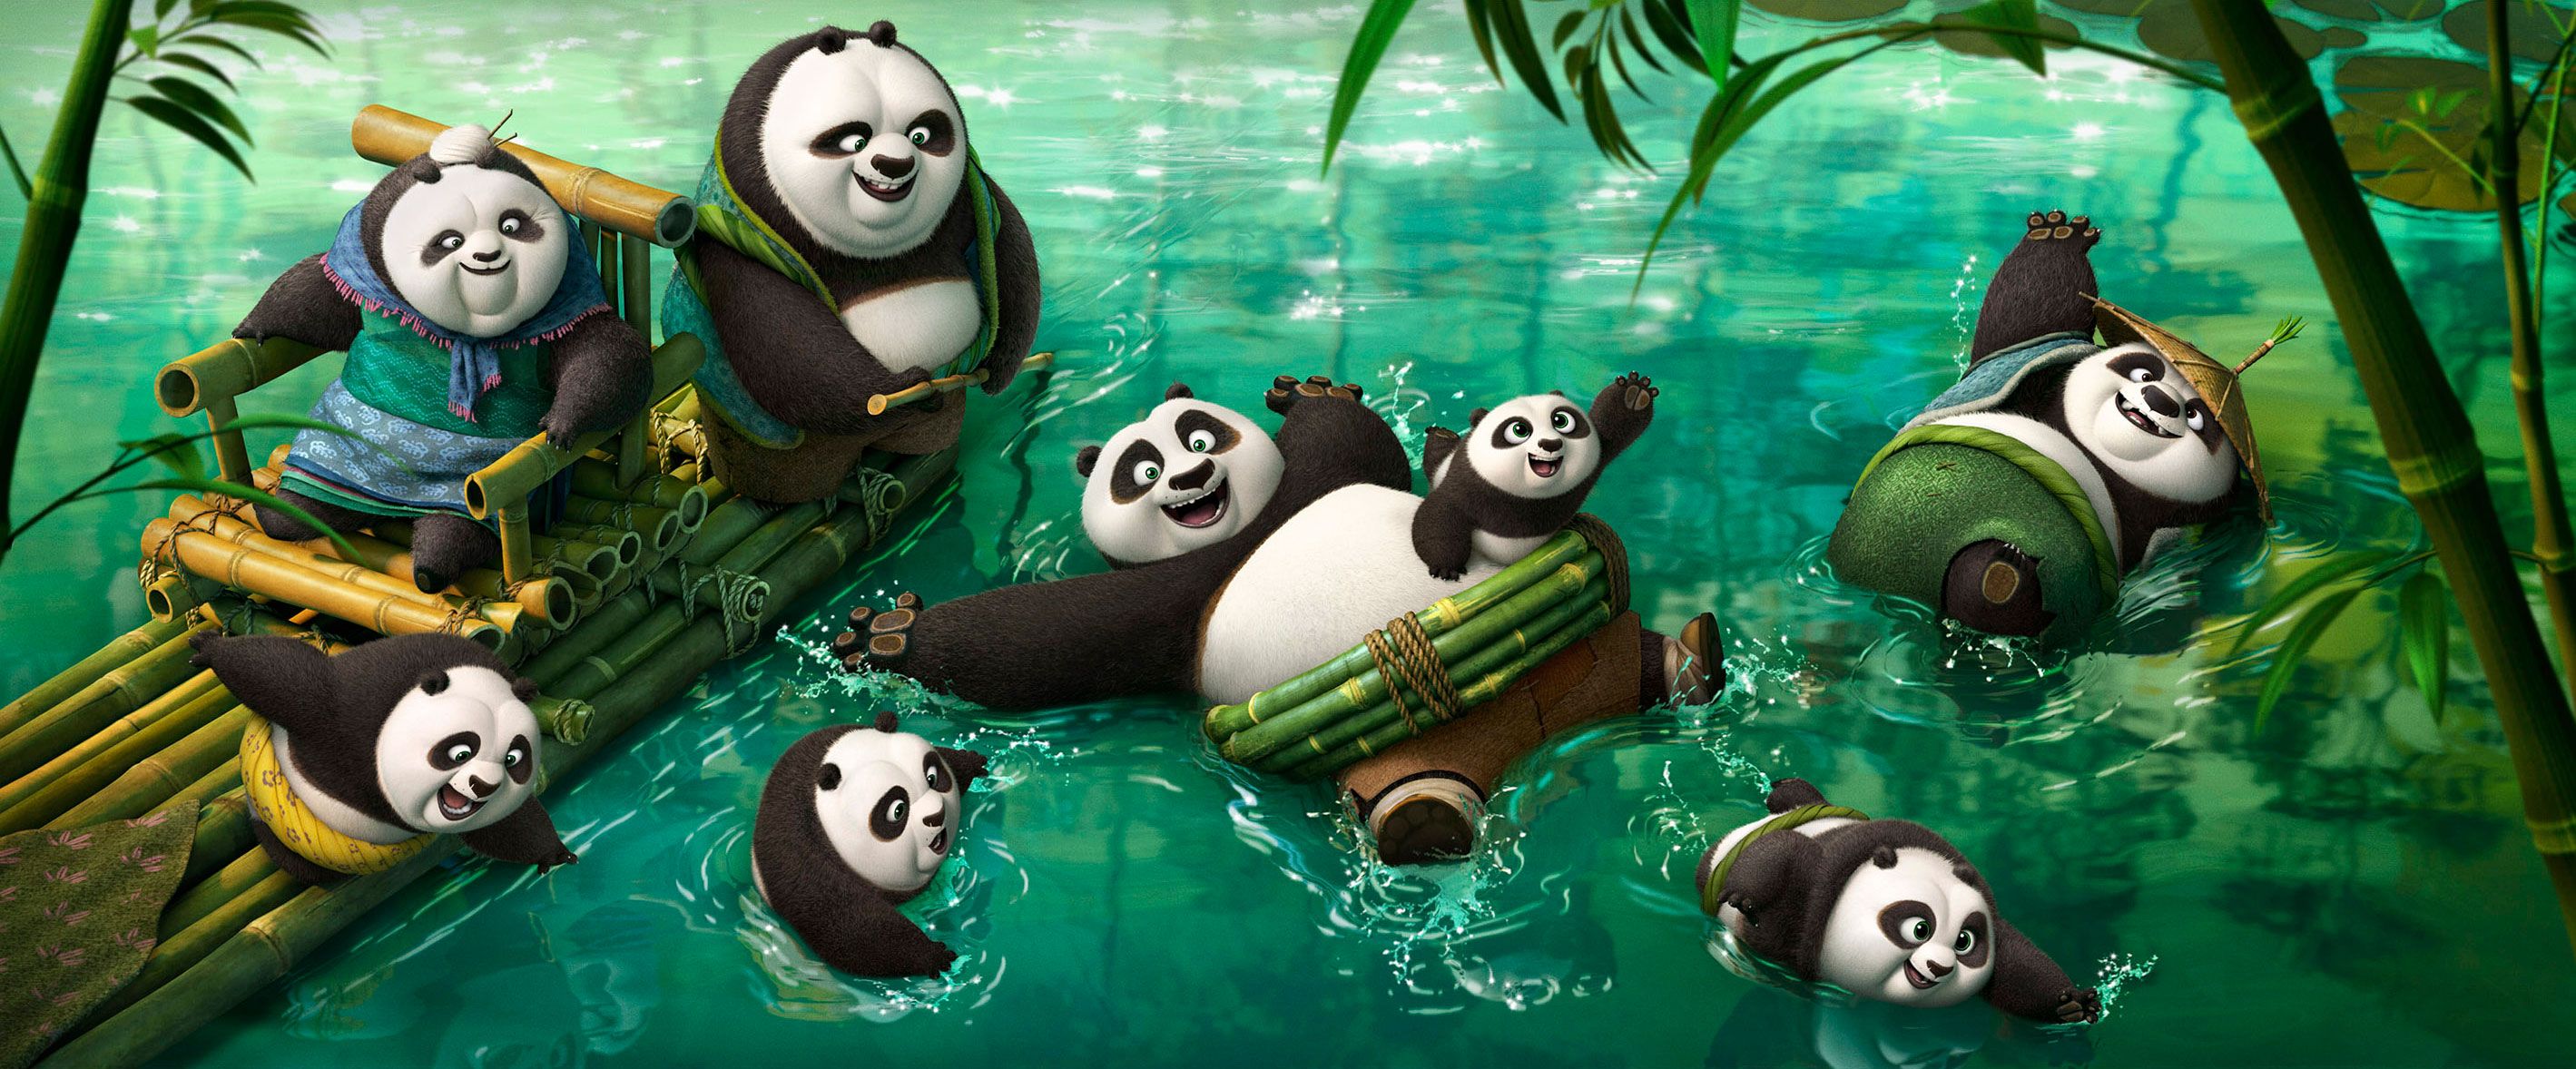 Kung Fu Panda 3 Trailer Takes Po Home for the Holidays ...